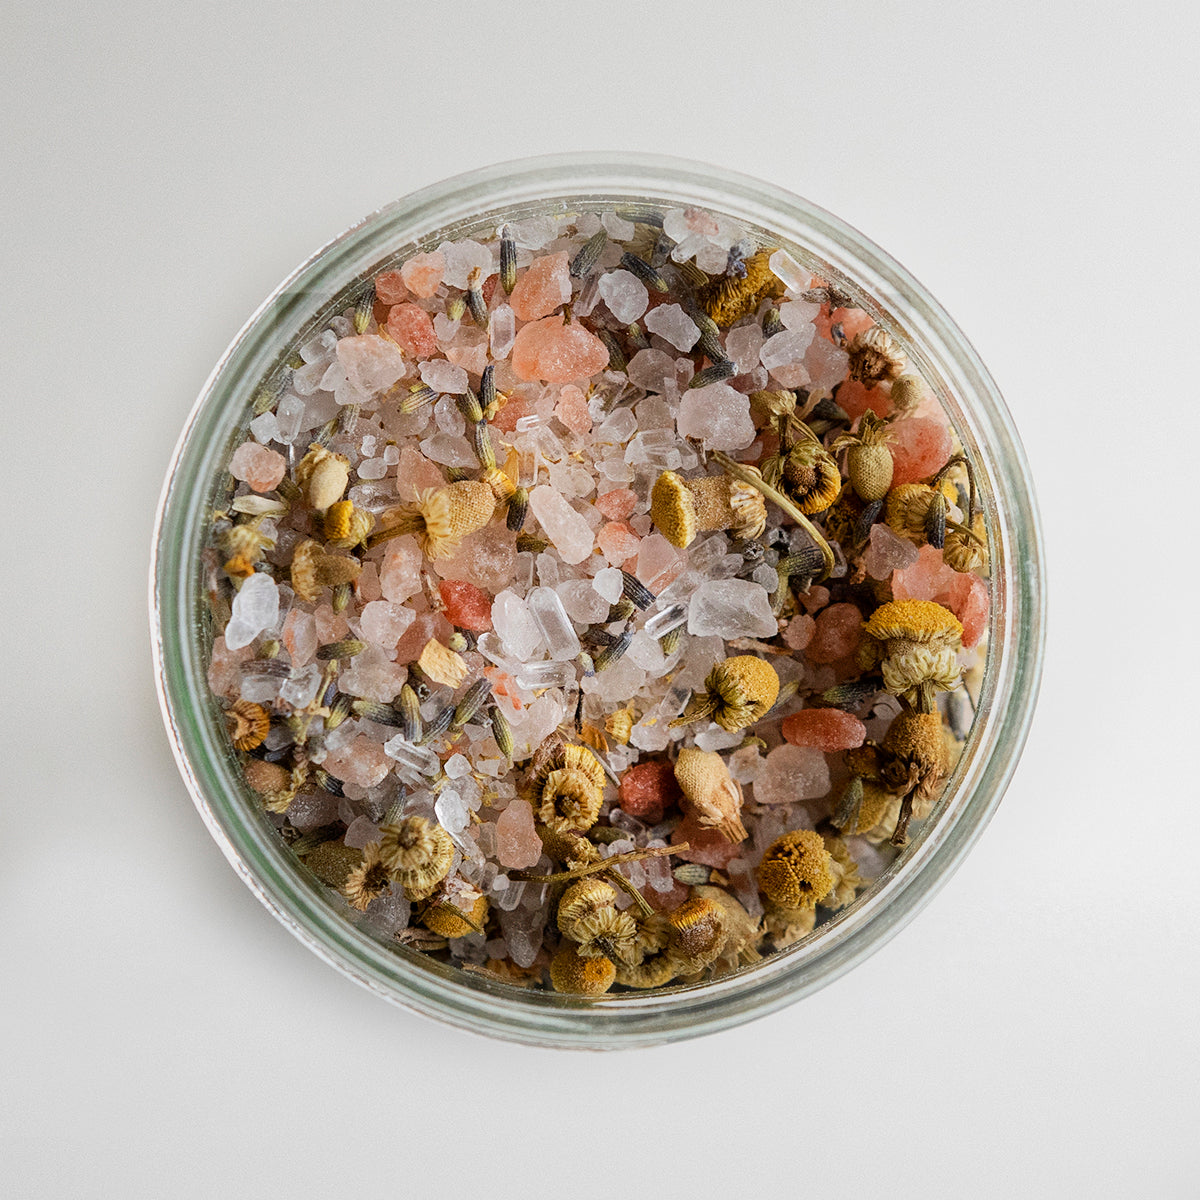 Top view of an open jar filled with a mixture of bath salts and dried herbs, including pink Himalayan salt, clear crystals, and various dried flowers on a white background.